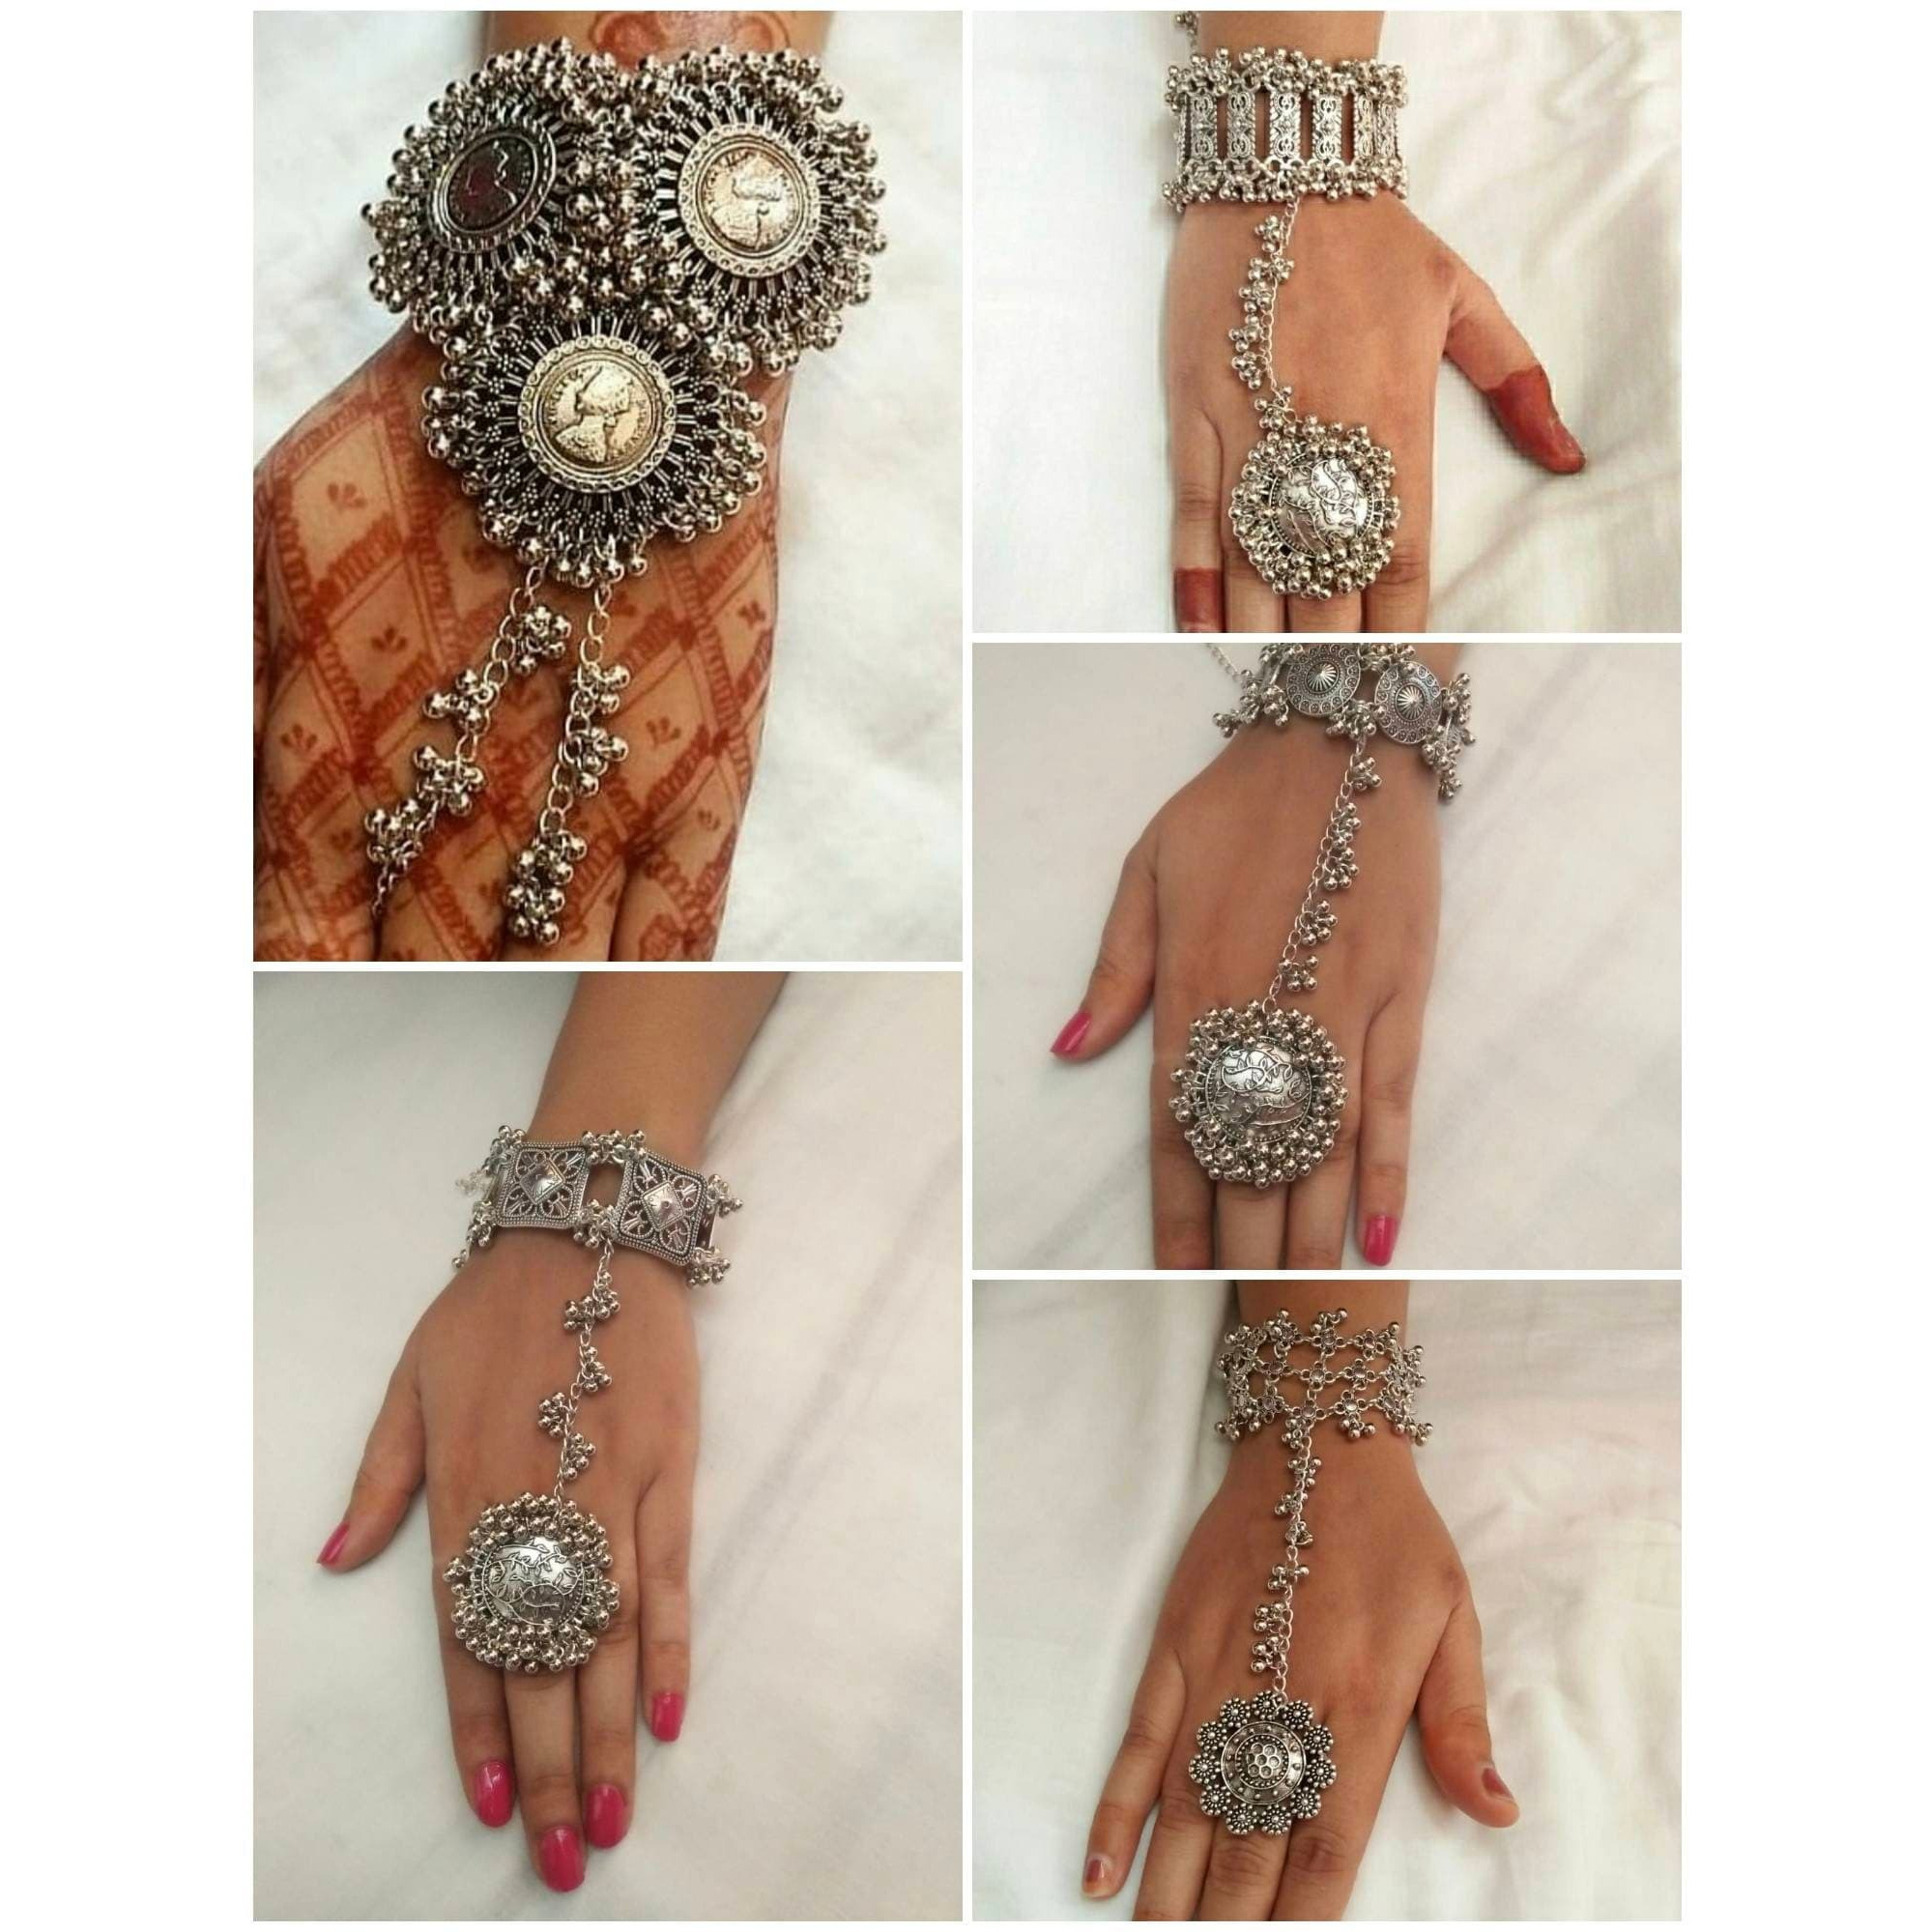 The oxidised bangle set, adorned with jhumkis by Vastrabhushan will leave you speechless. Incredibly well-made, this Navratri jewelry exudes elegance and sophistication. When it comes to important events like weddings, anniversaries, and engagements????????or even as a gift????????this alluring oxidized silver jewelry is your best bet! Radiant silver bangles are the ideal accessory for any evening event. It is certain to set you out in a crowded room. It is recommended to store oxidised jeweller